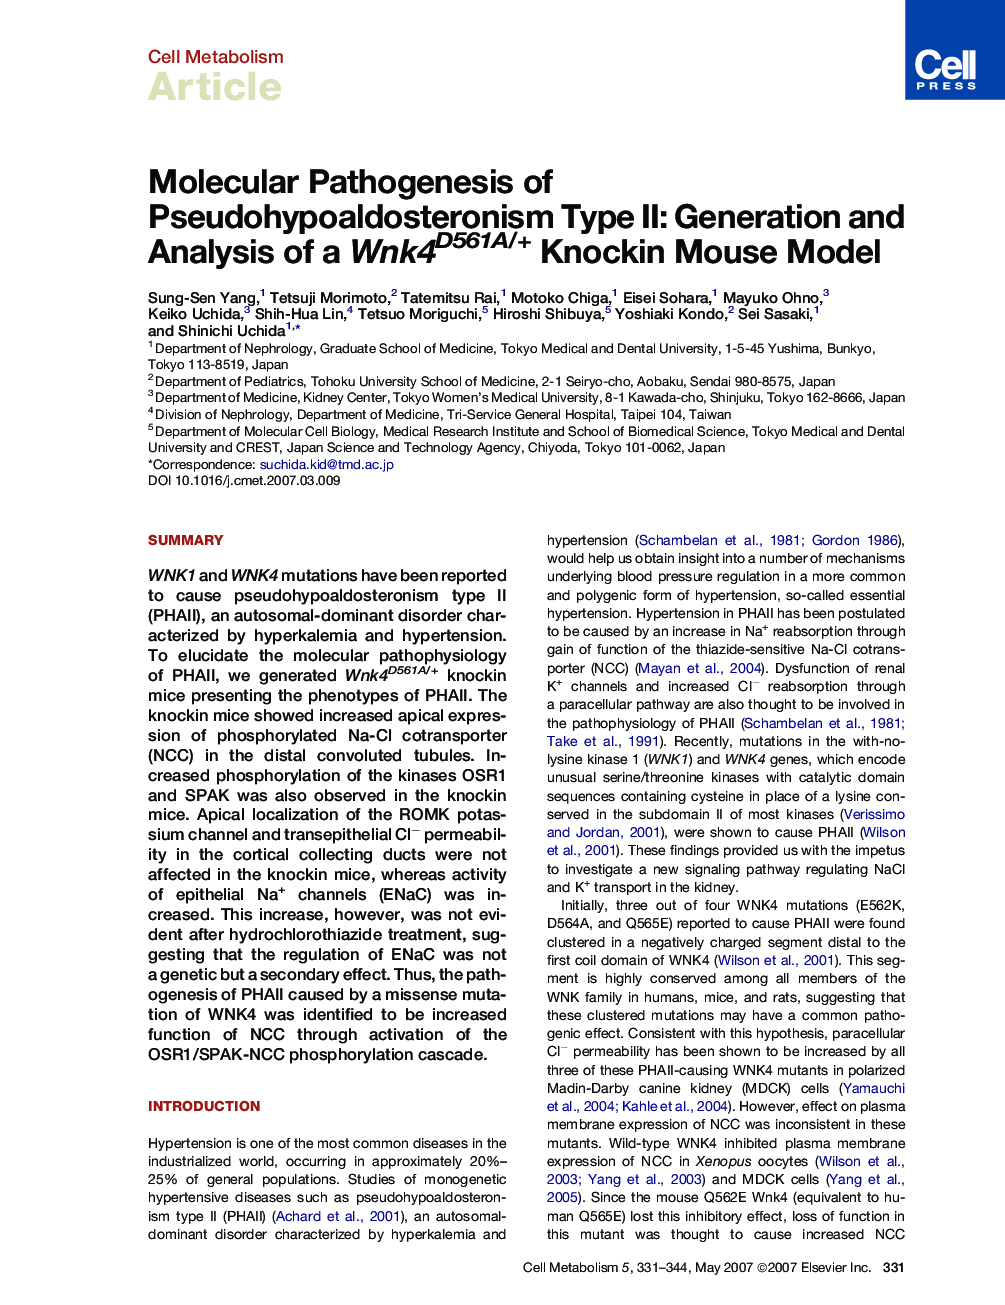 Molecular Pathogenesis of Pseudohypoaldosteronism Type II: Generation and Analysis of a Wnk4D561A/+ Knockin Mouse Model